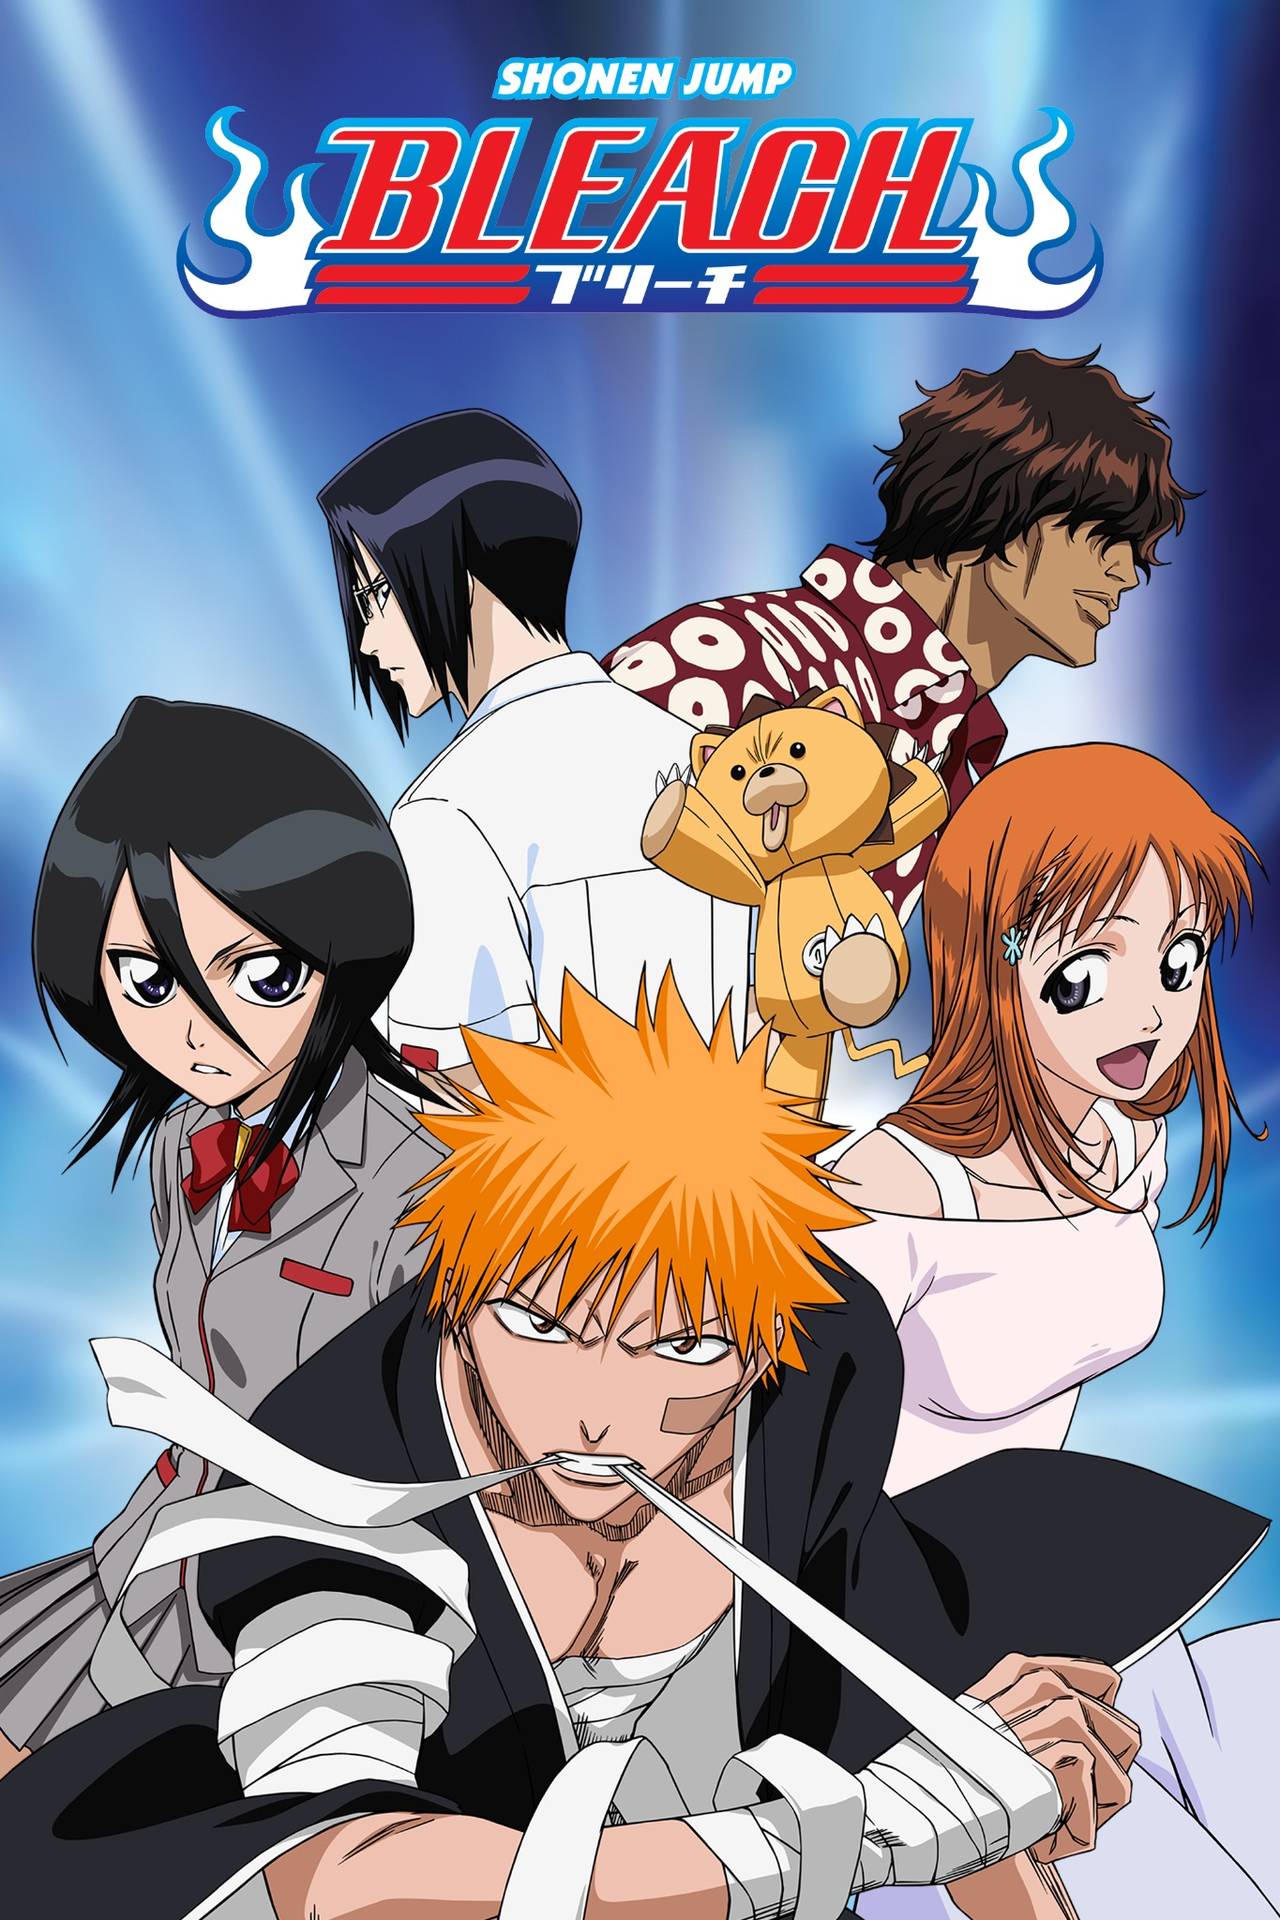 Crunchyroll announces the addition of Bleach and 9 other new anime series 